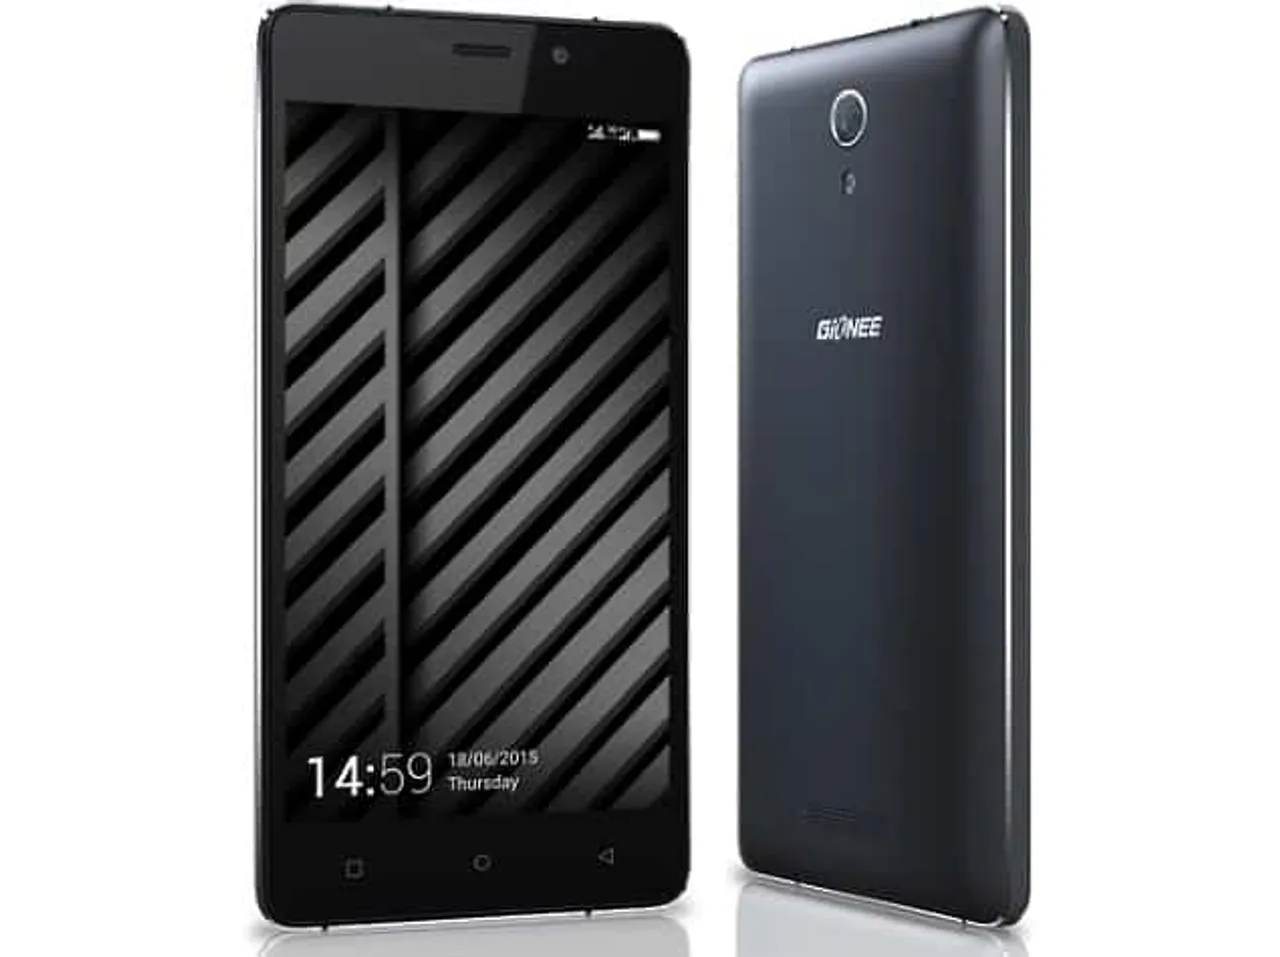 Gionee launches Marathon M4 smartphone priced at Rs 15,499